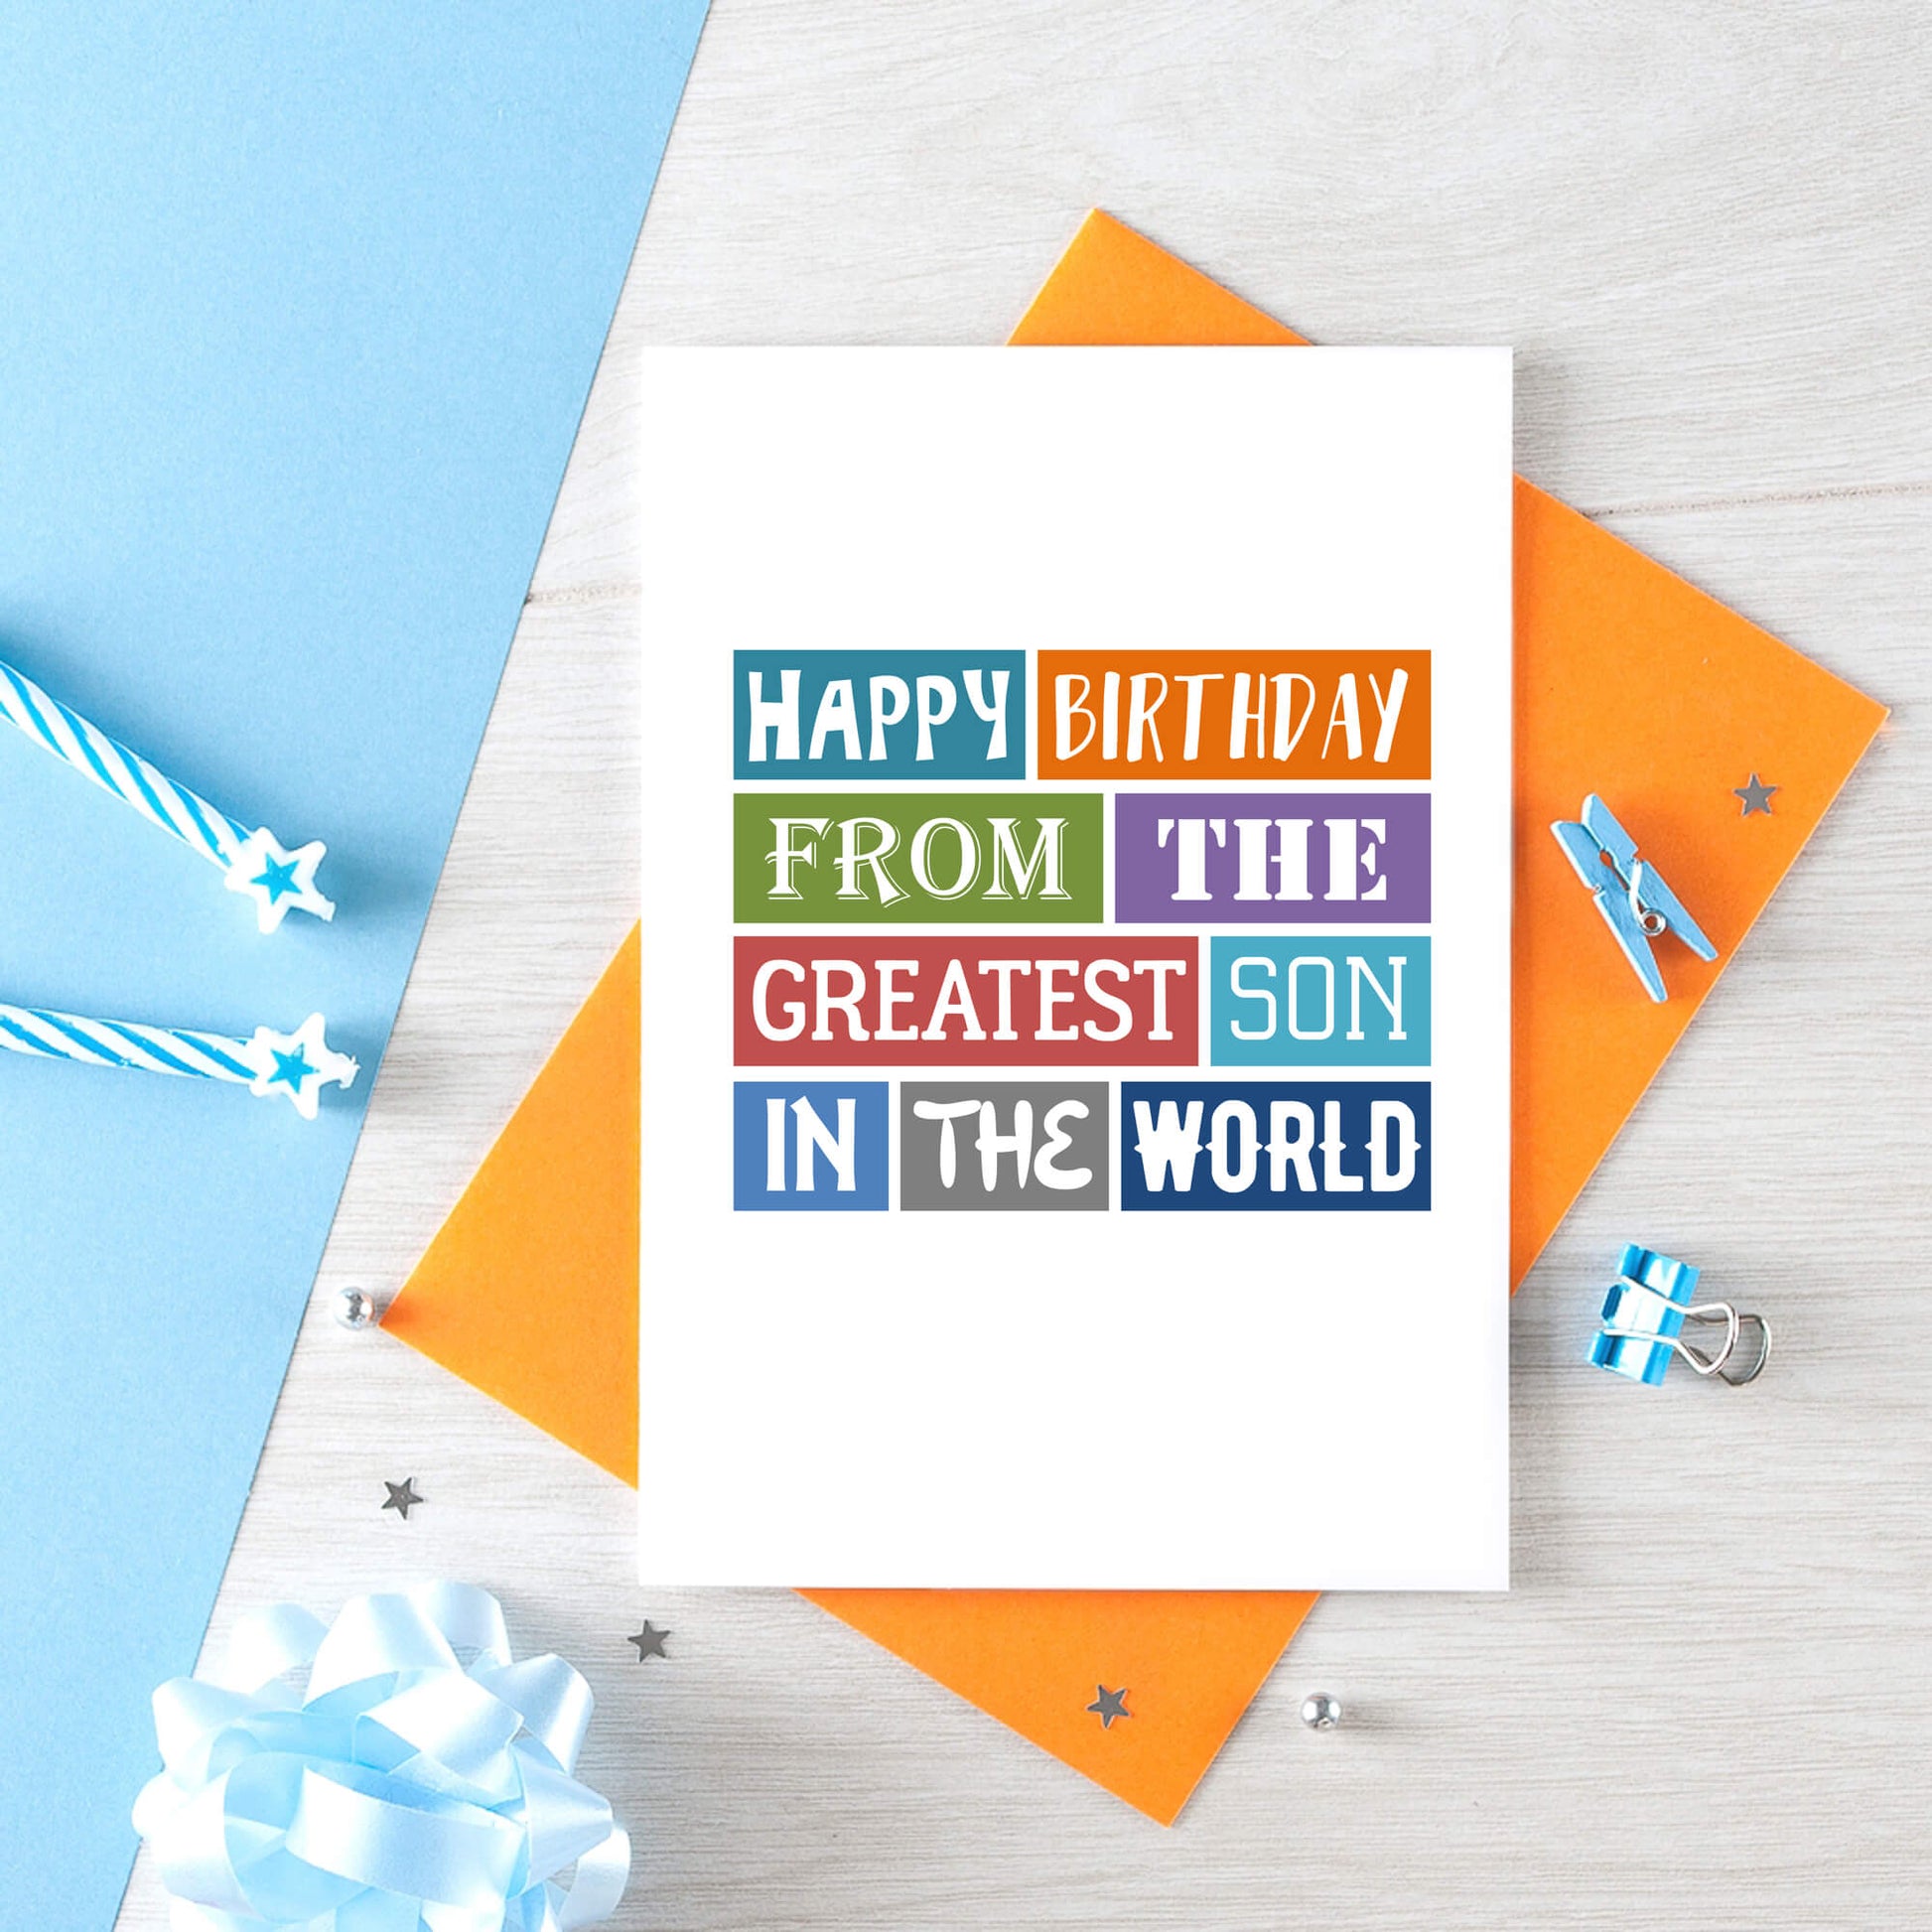 Birthday Card by SixElevenCreations. Reads Happy birthday from the greatest son in the world. Product Code SE0158A6